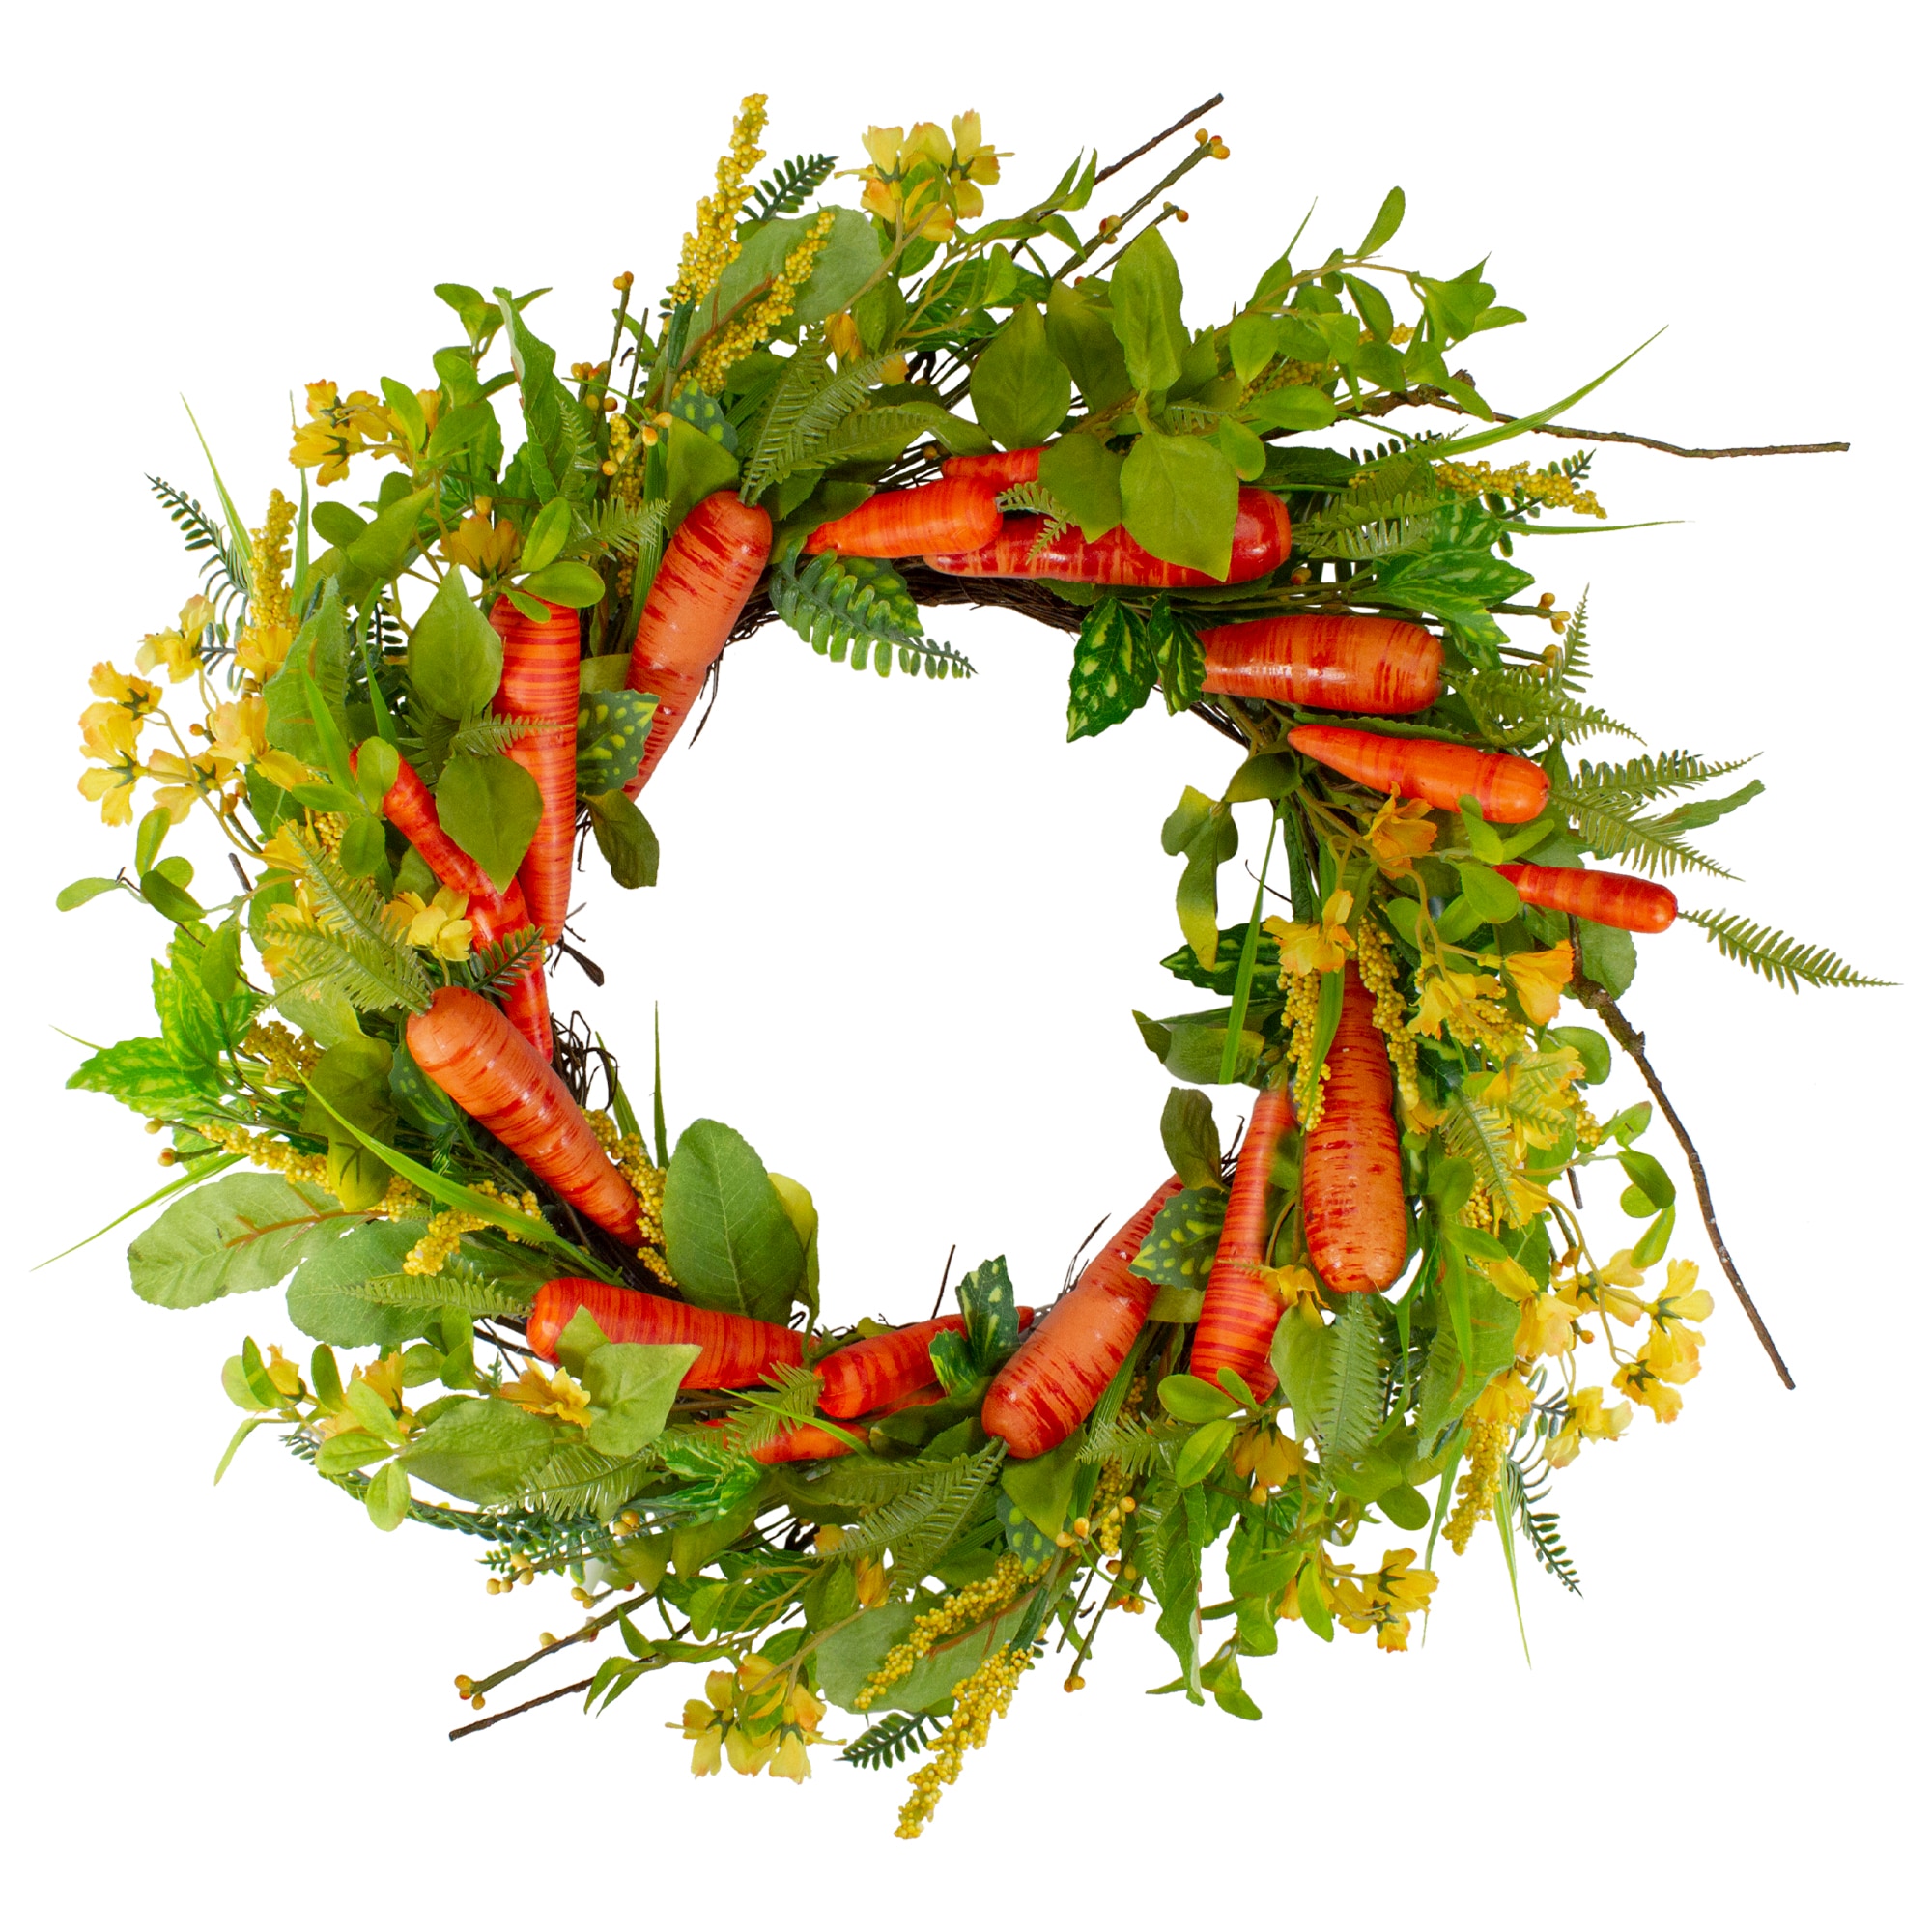 Carrot wreath attachment Easter wreath accent